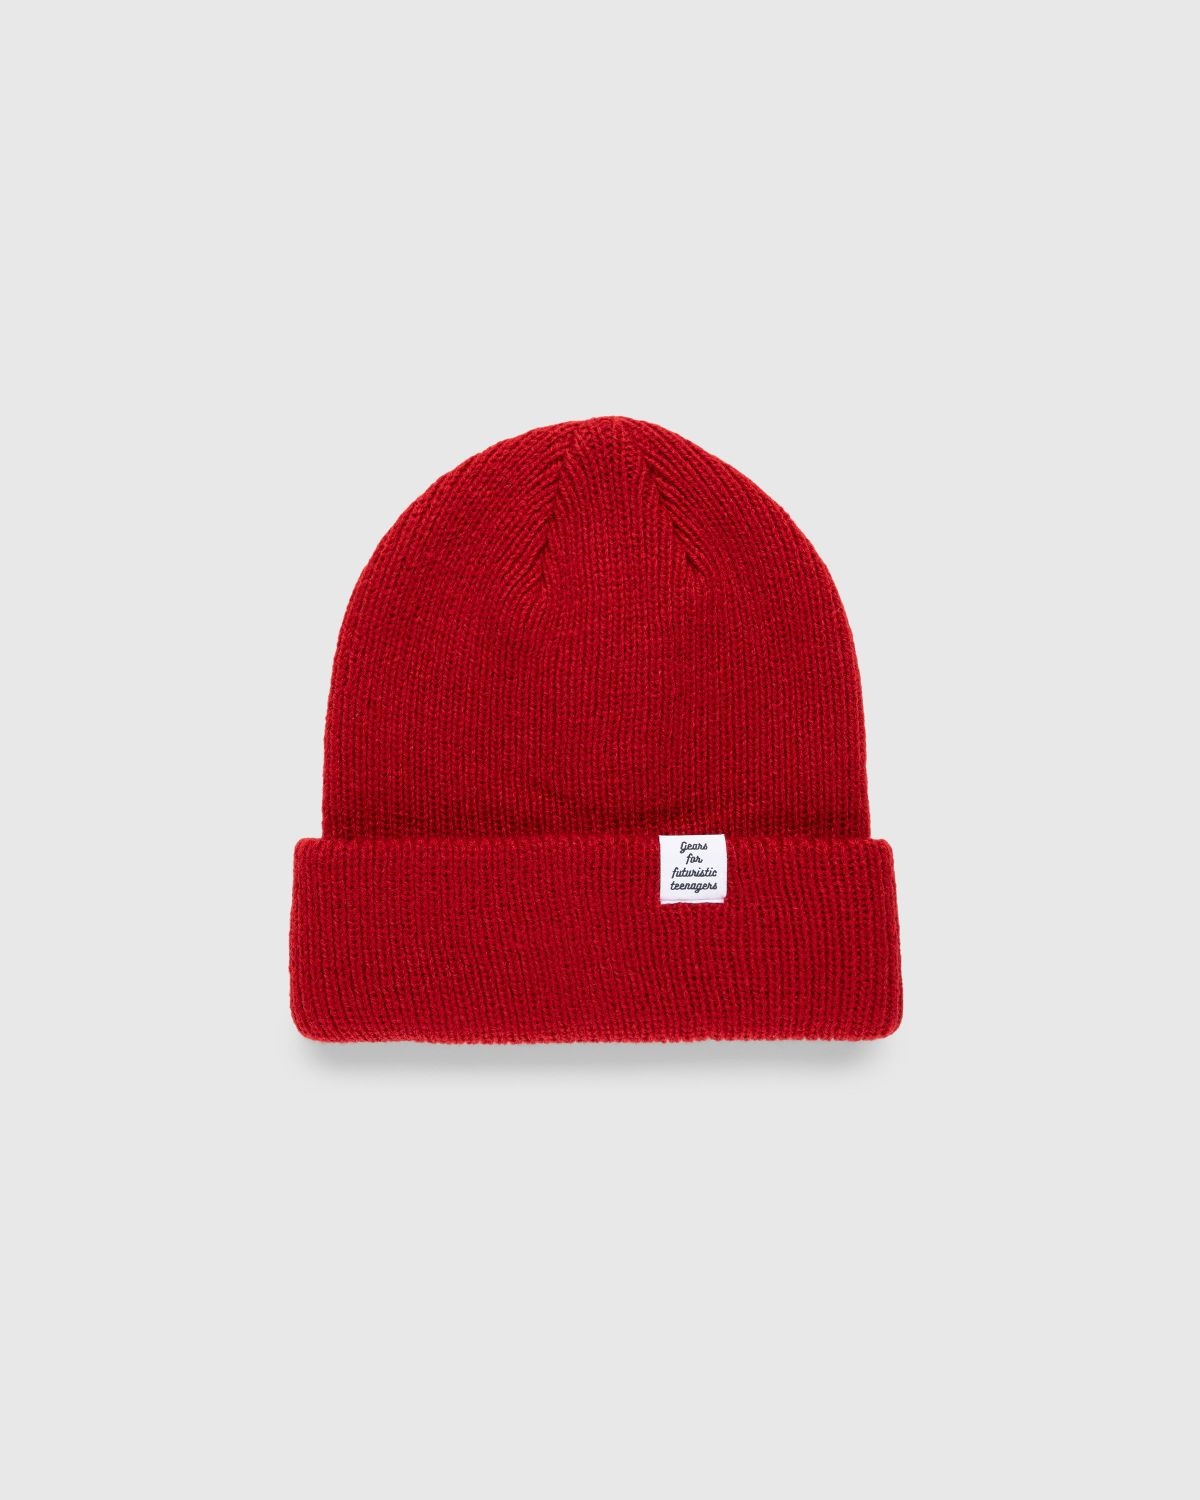 Human Made – Classic Beanie Red - 1